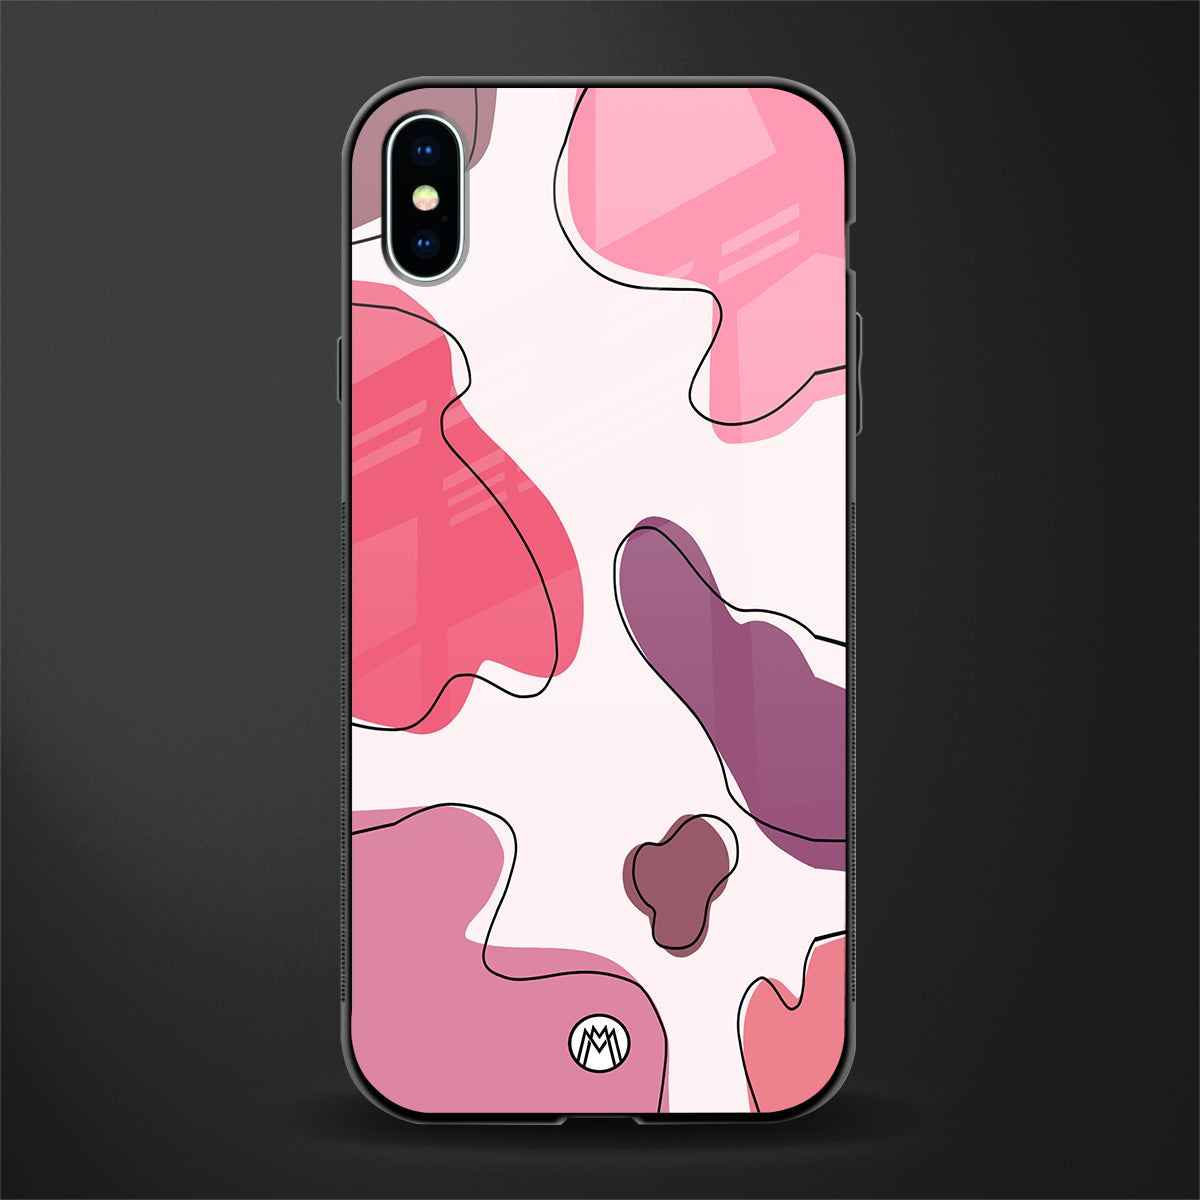 cotton candy taffy edition glass case for iphone xs max image